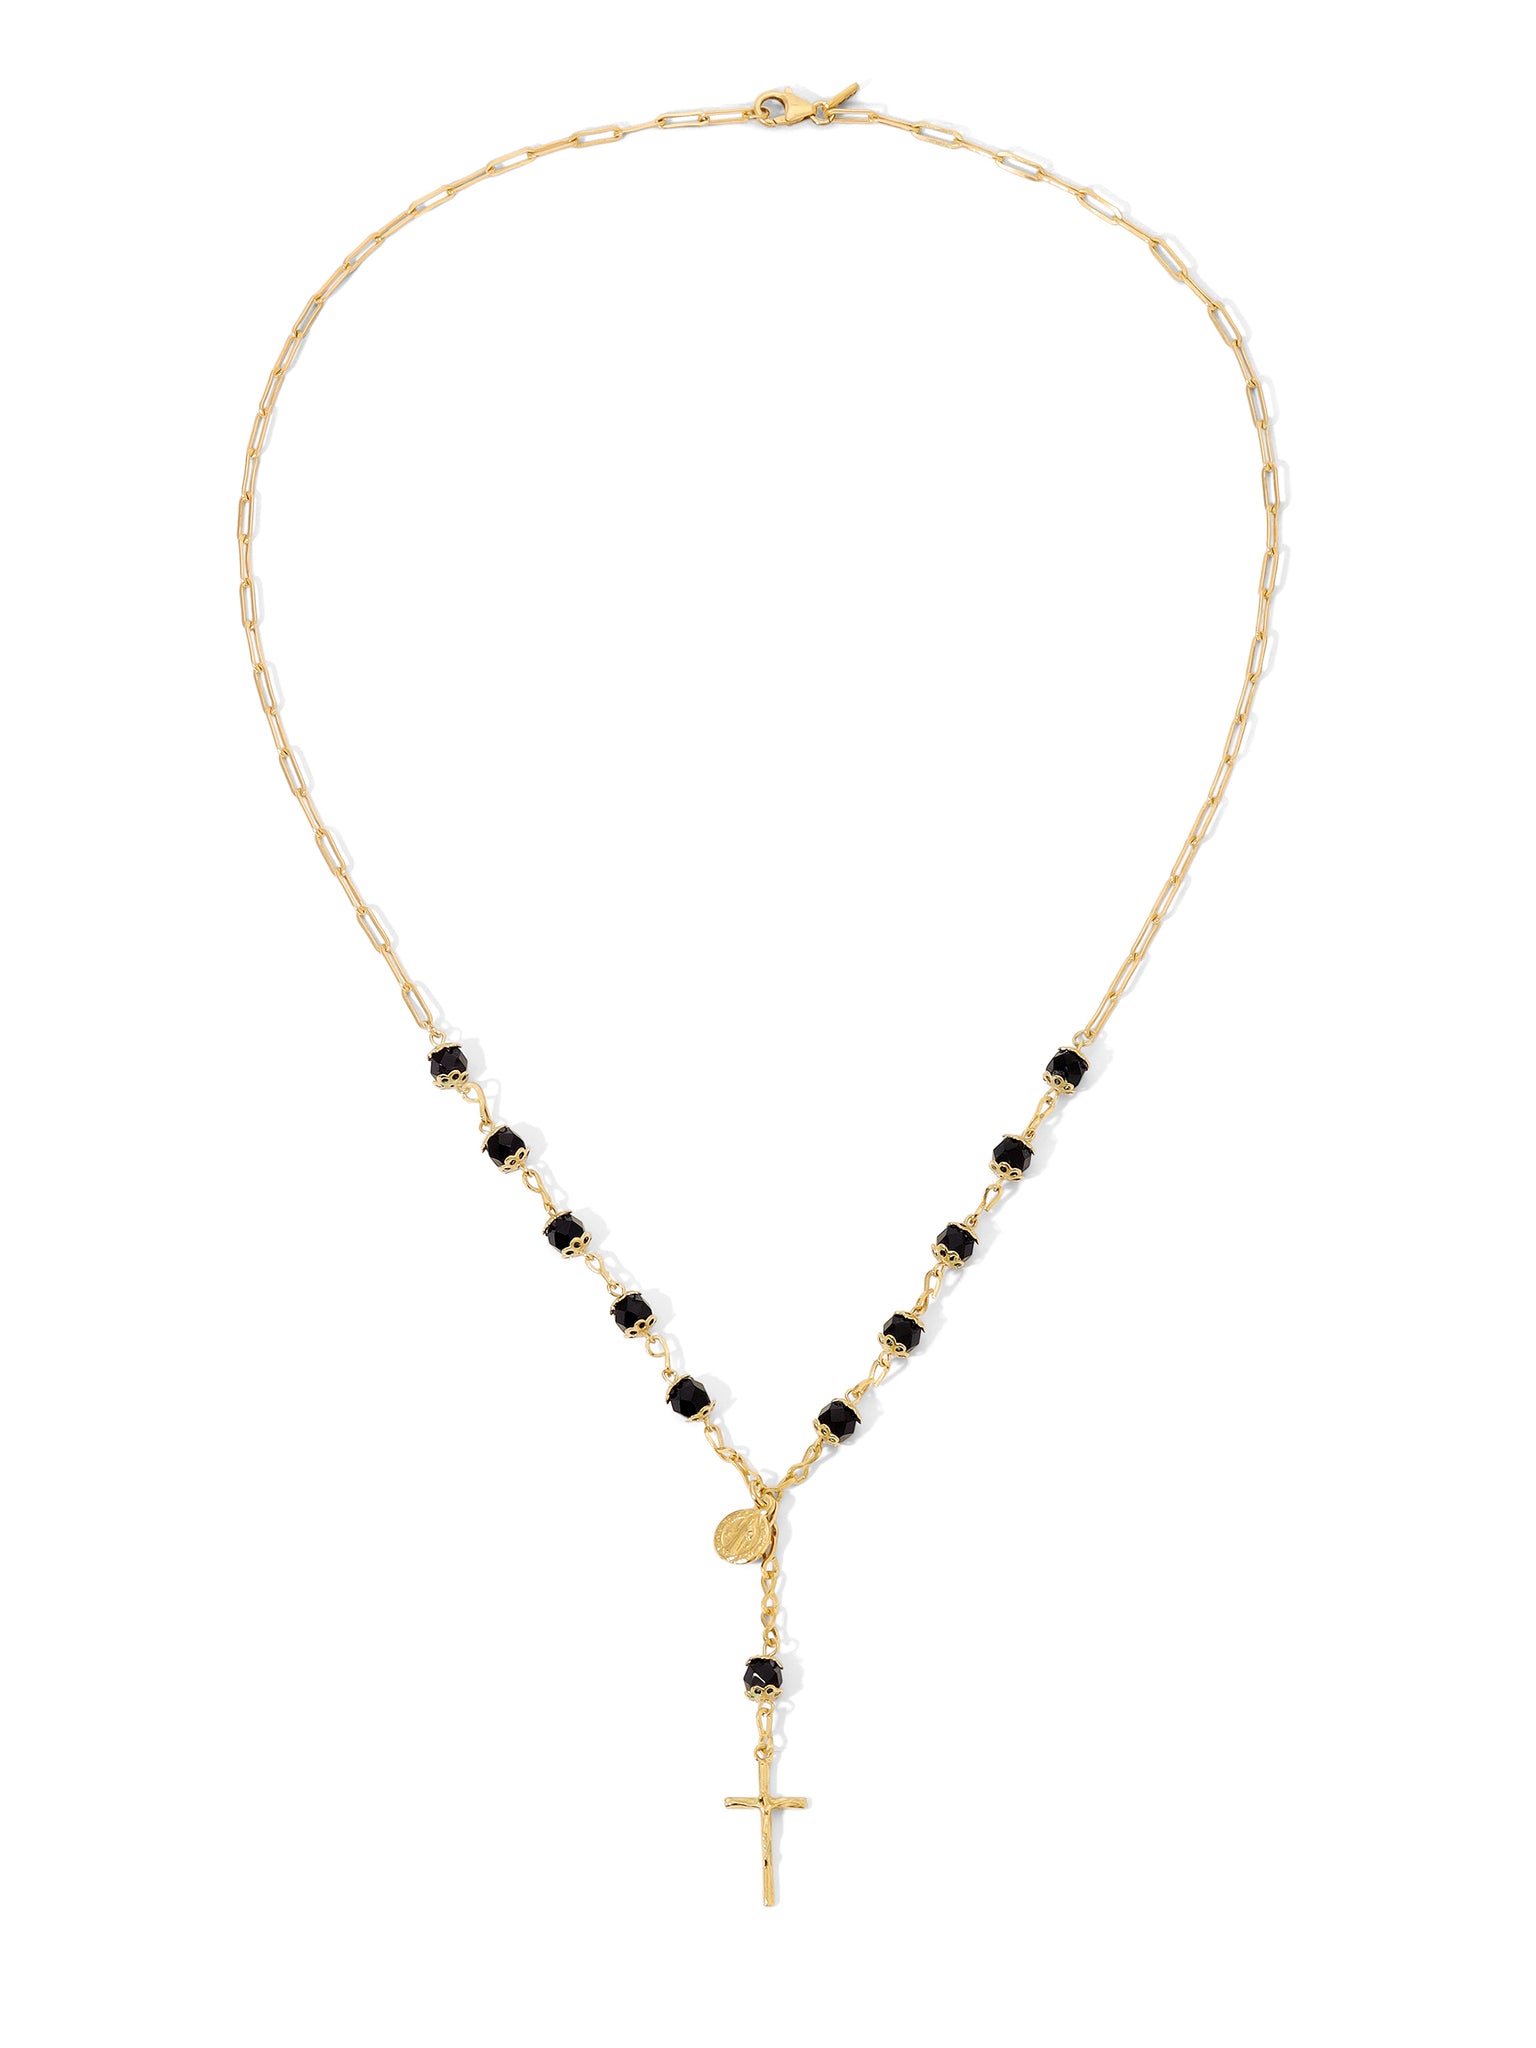 LIFETIME JEWELRY Small Rosary Necklace Prayer Beads 24K Real Gold Plated |  Amazon.com